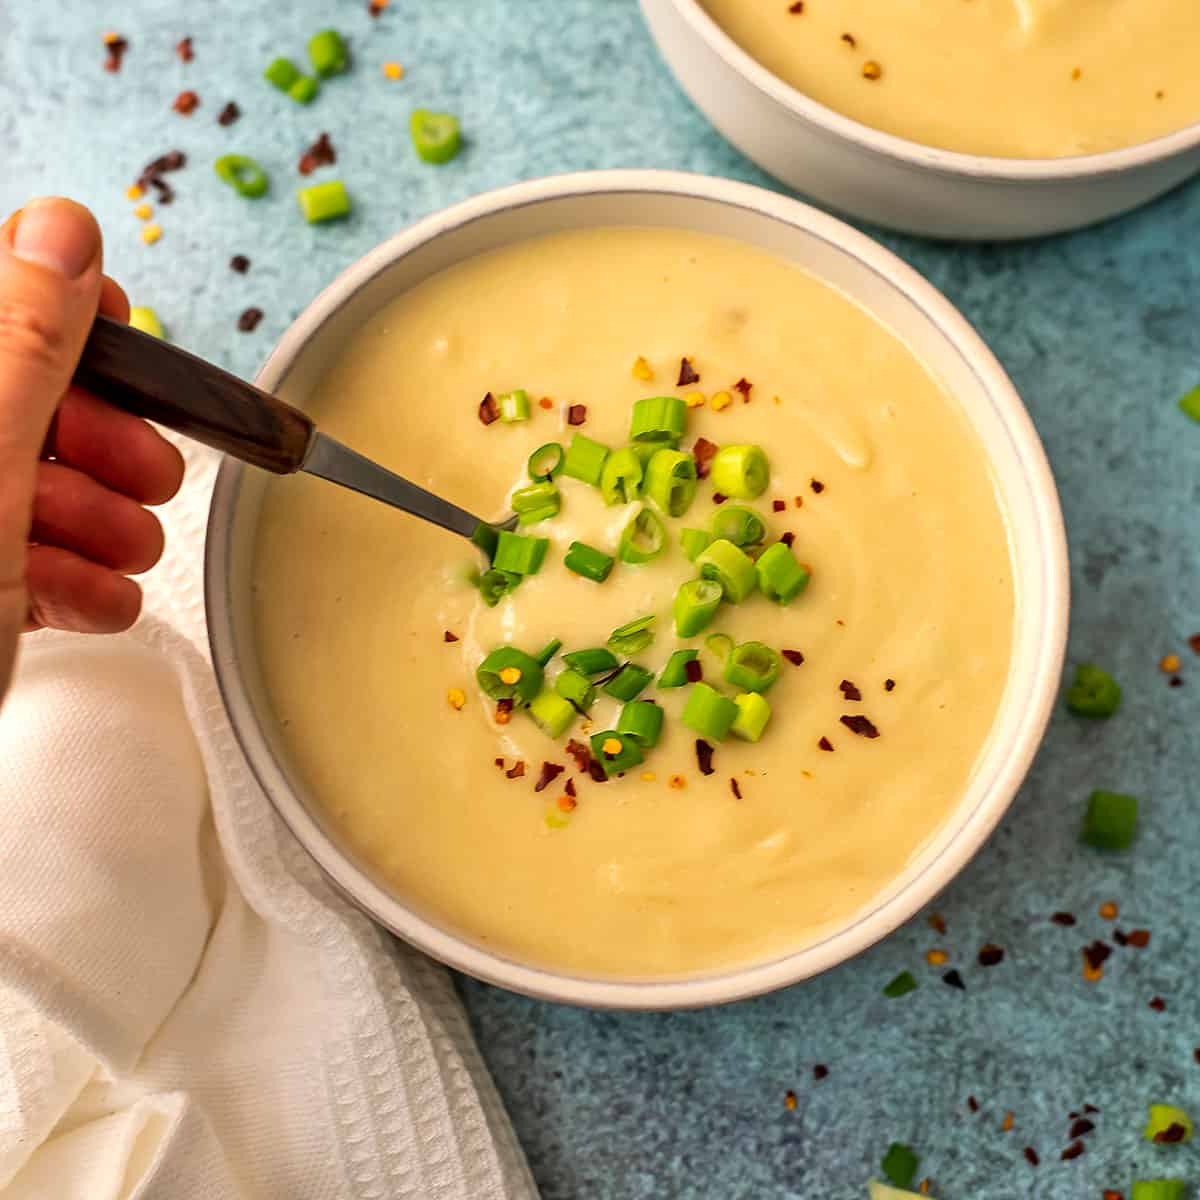 Vegan potato soup in a white bowl with a hand holding a spoon in the soup.